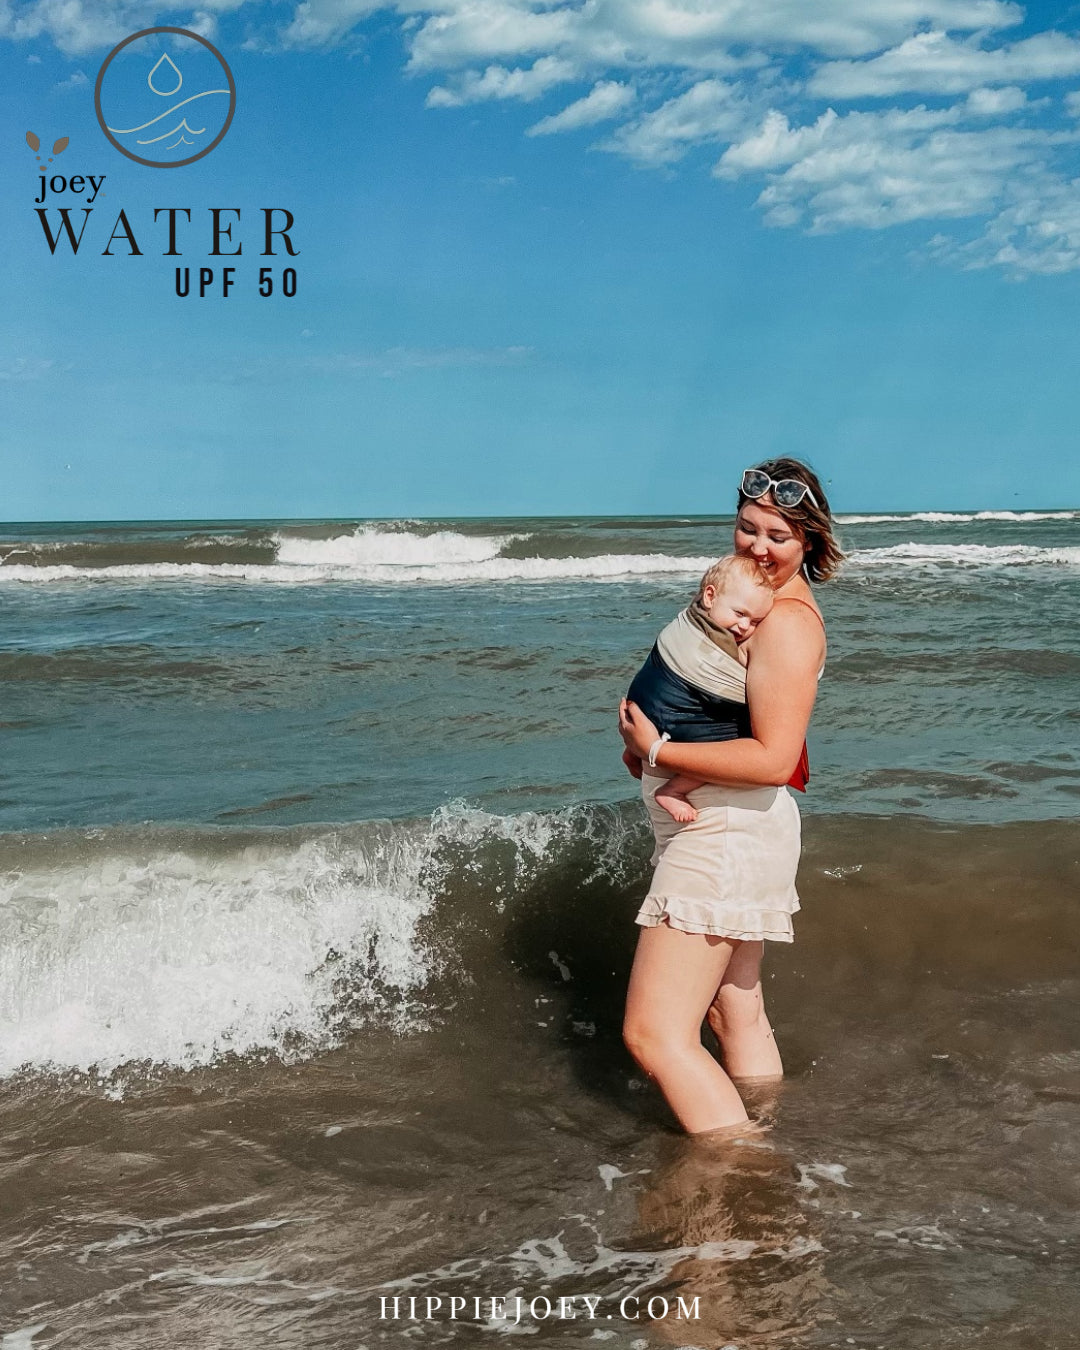 Joey Water ( A waterproof simple, stretchy Sling/ Wrap/ baby carrier type assistant garment)  being used on the beach to keep baby happy while standing in ocean